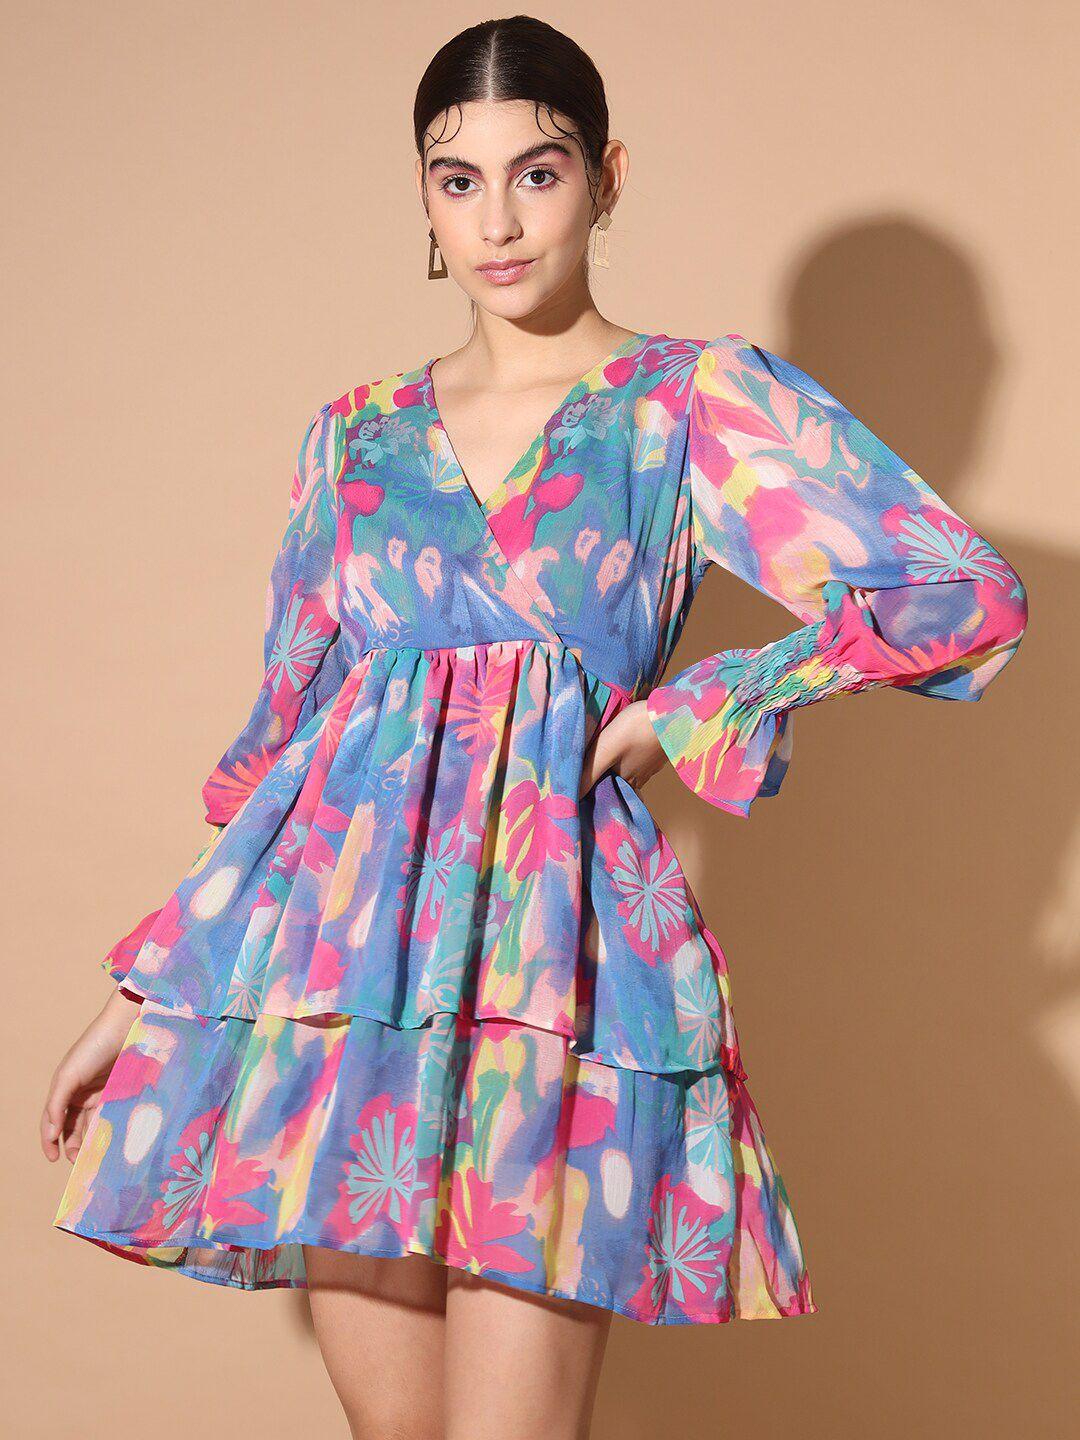 cation absatrct printed puff sleeves chiffon fit & flare dress